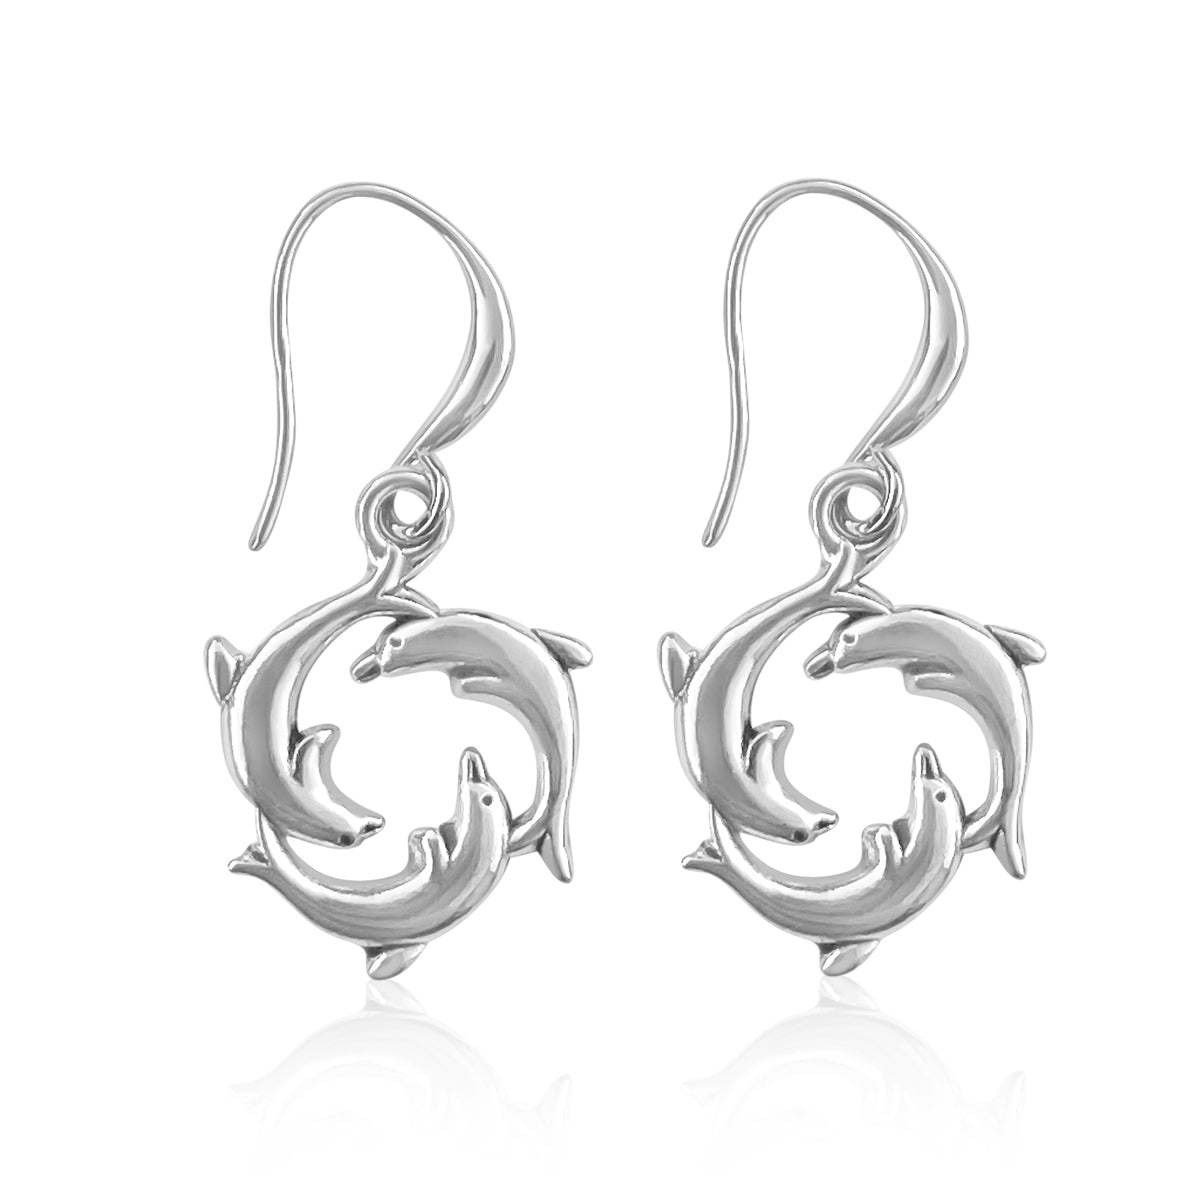 The Dolphin Dance Earrings are a splash of joy and a reminder of the carefree magic of the ocean.